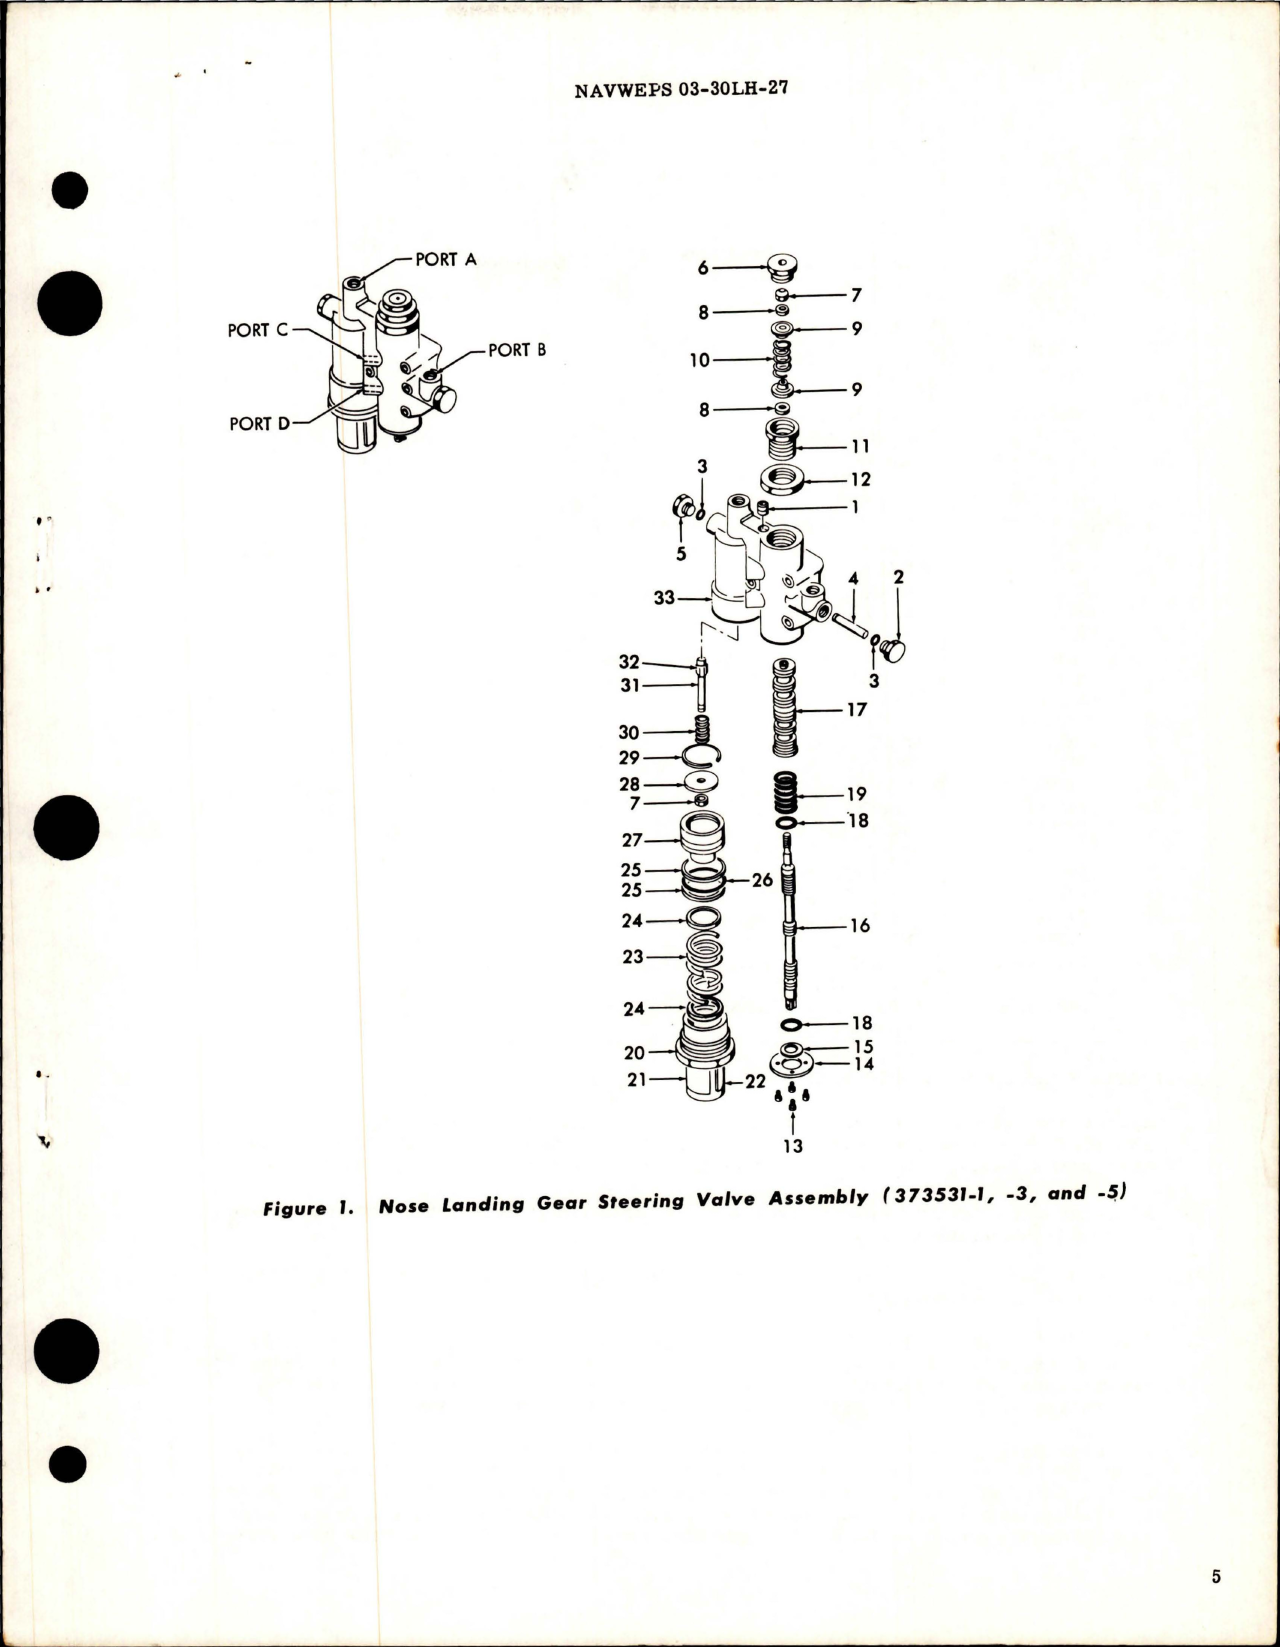 Sample page 5 from AirCorps Library document: Overhaul Instructions with Parts Breakdown for Nose Landing Gear Steering Valve Assembly 